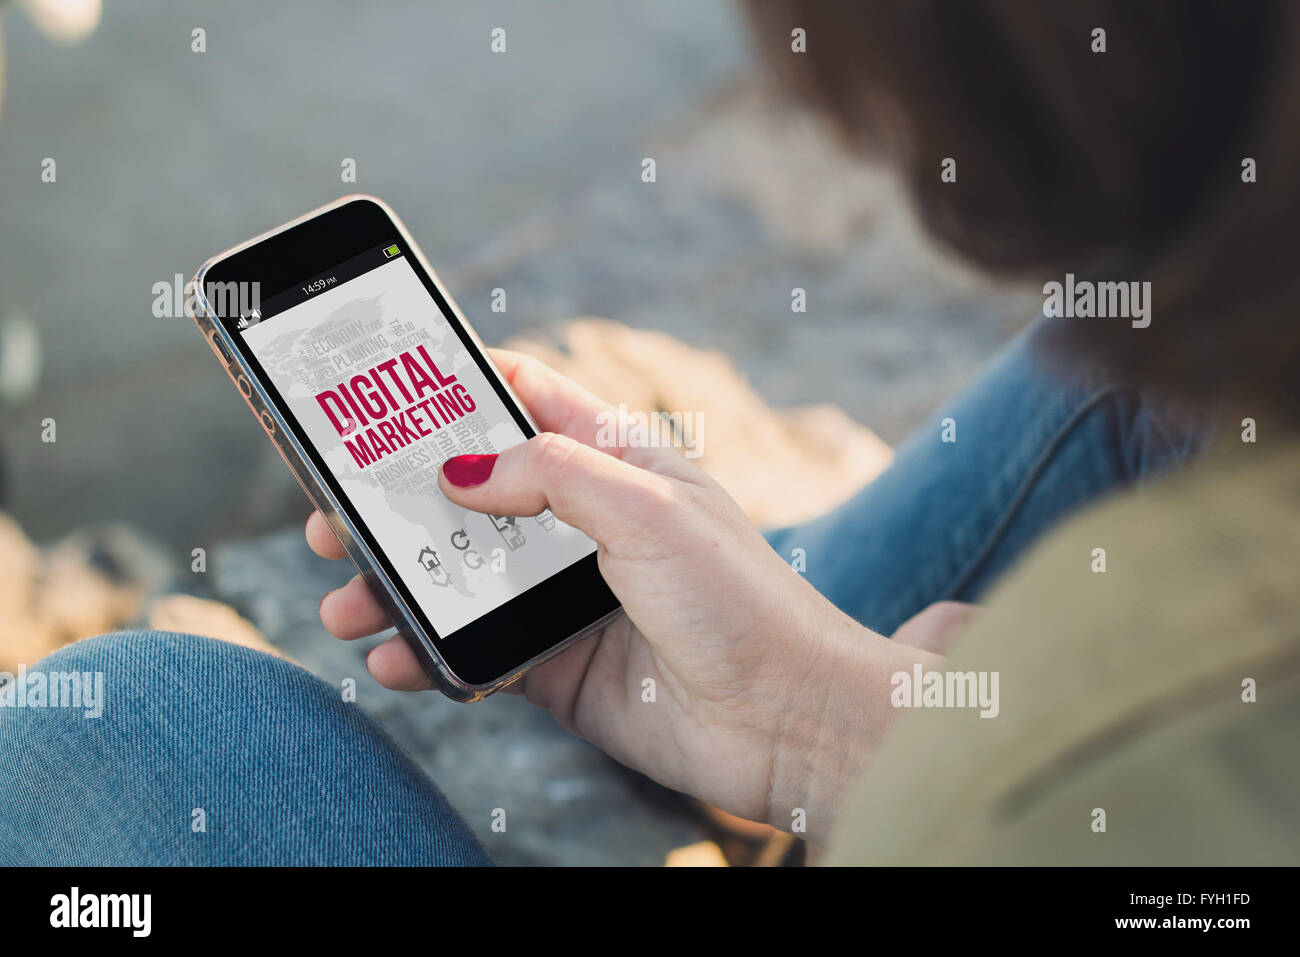 woman holding a smartphone with digital marketing on screen. All screen graphics are made up. Stock Photo